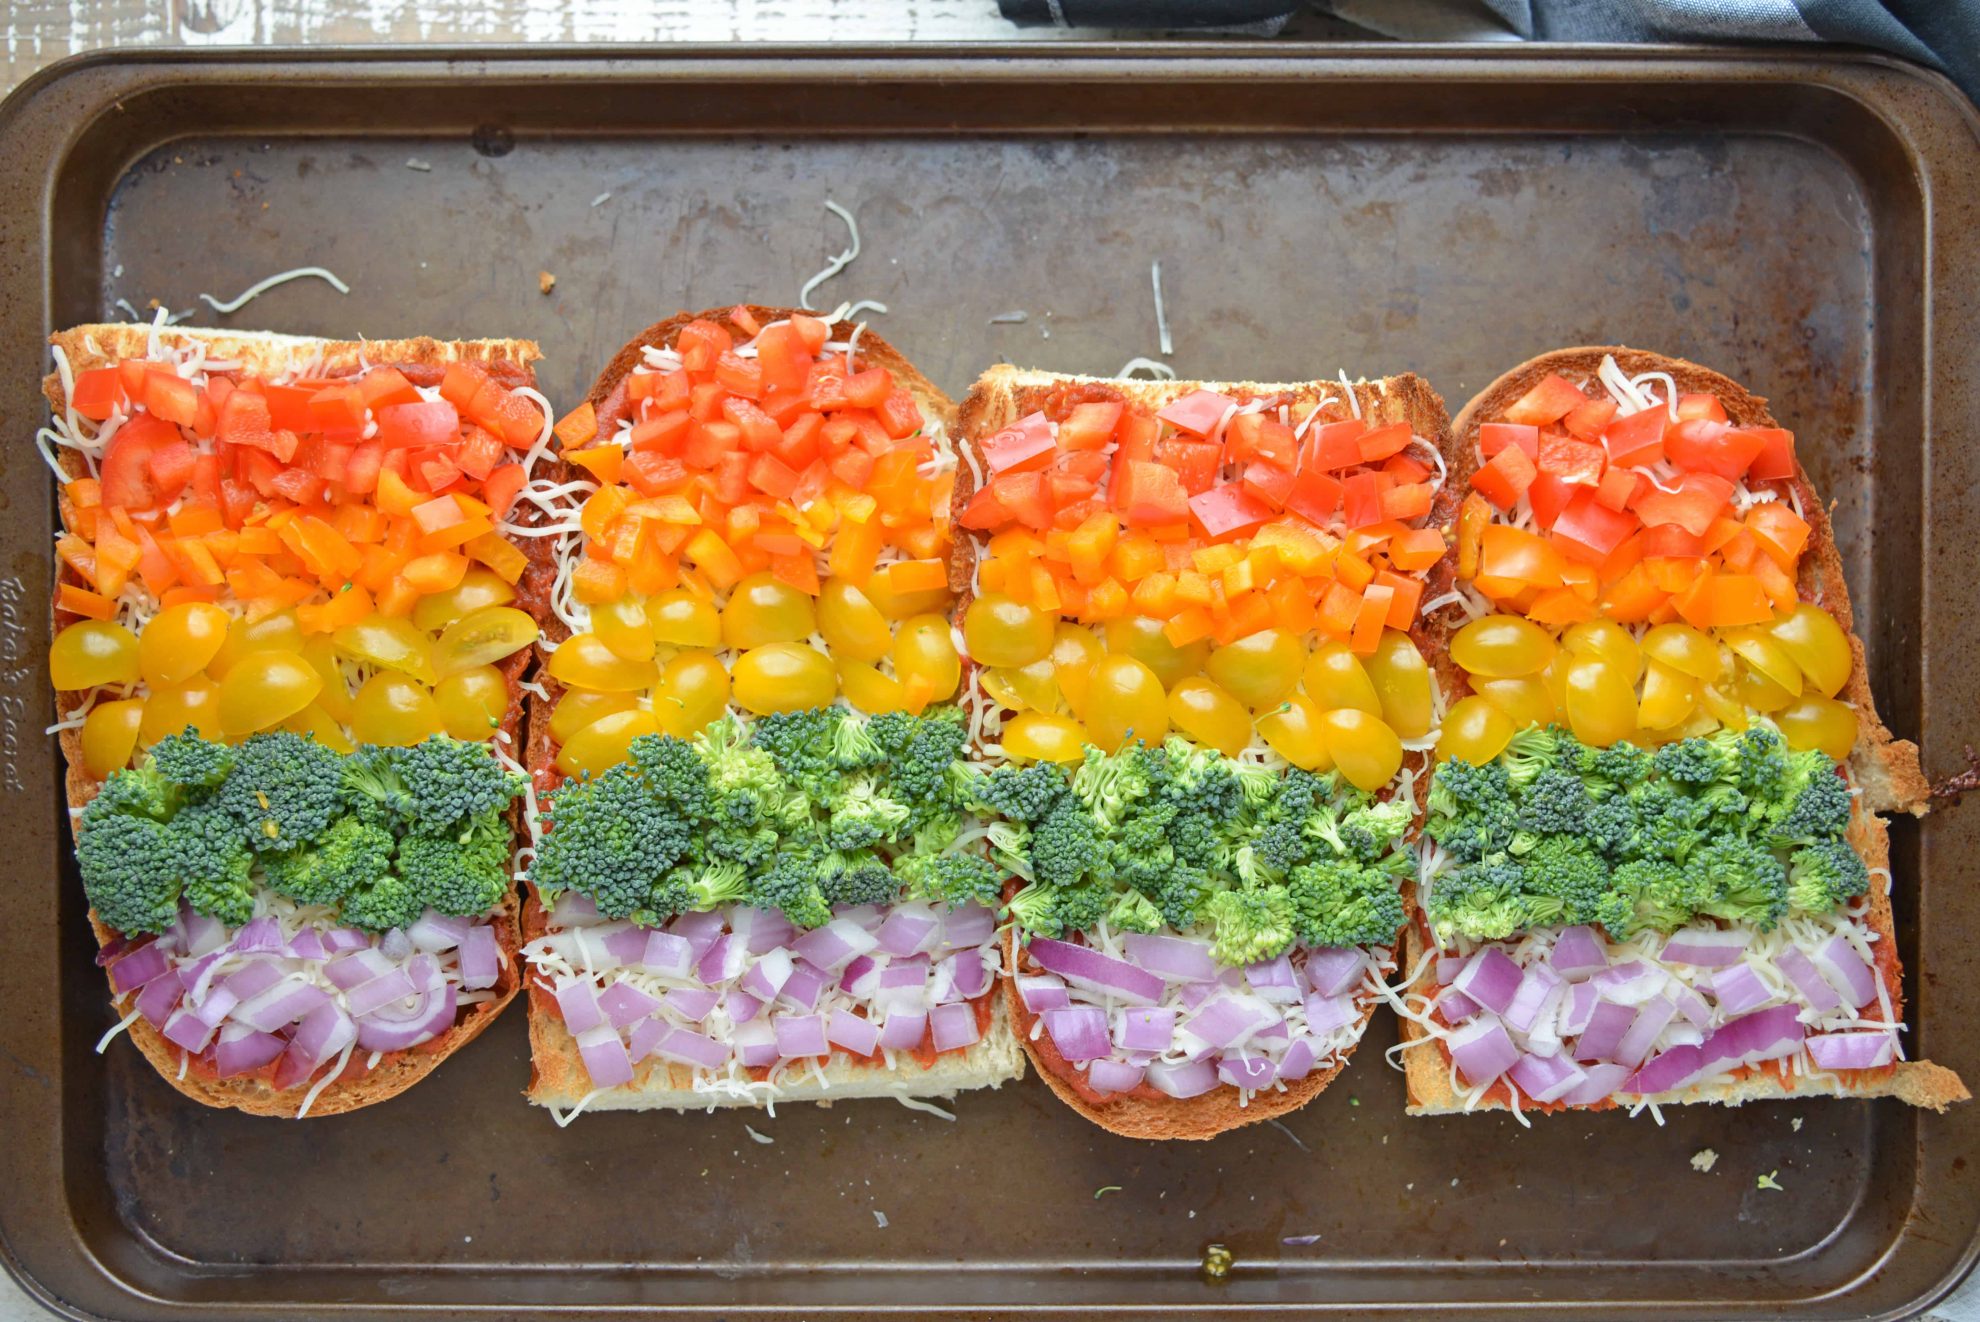 Rainbow French Bread Pizza before baking